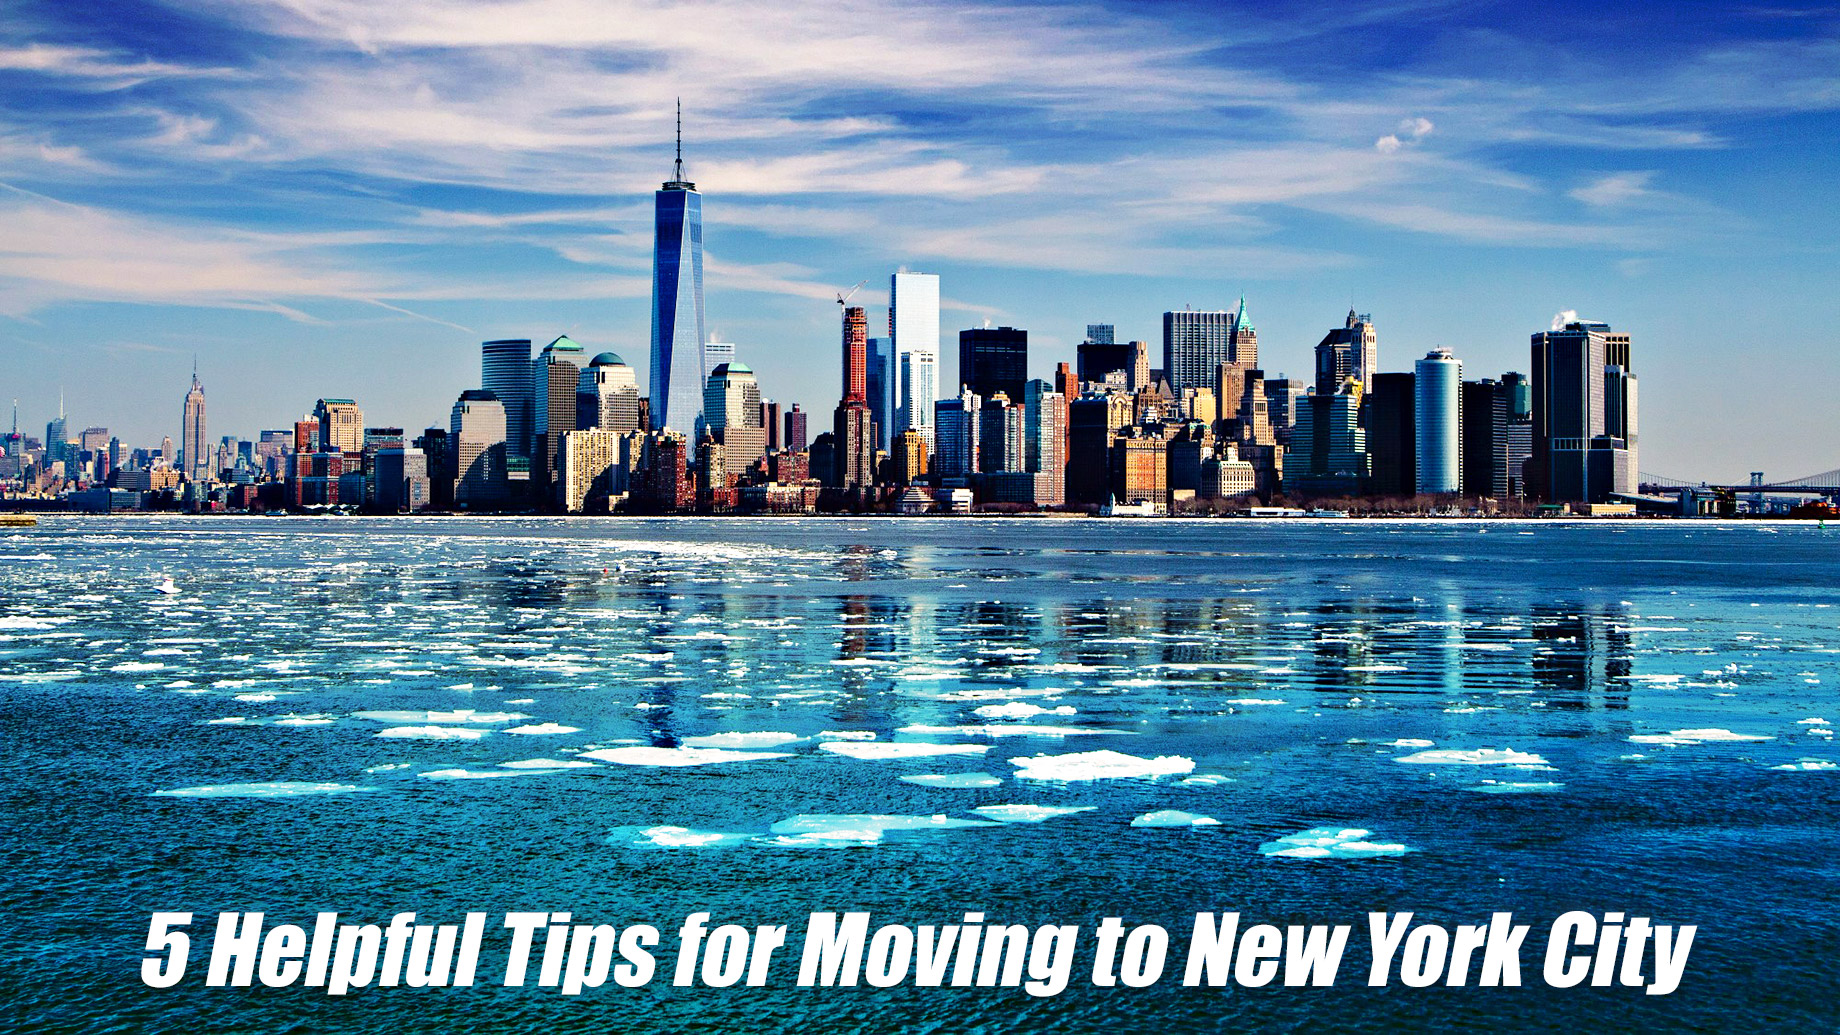 5 Helpful Tips for Moving to New York City